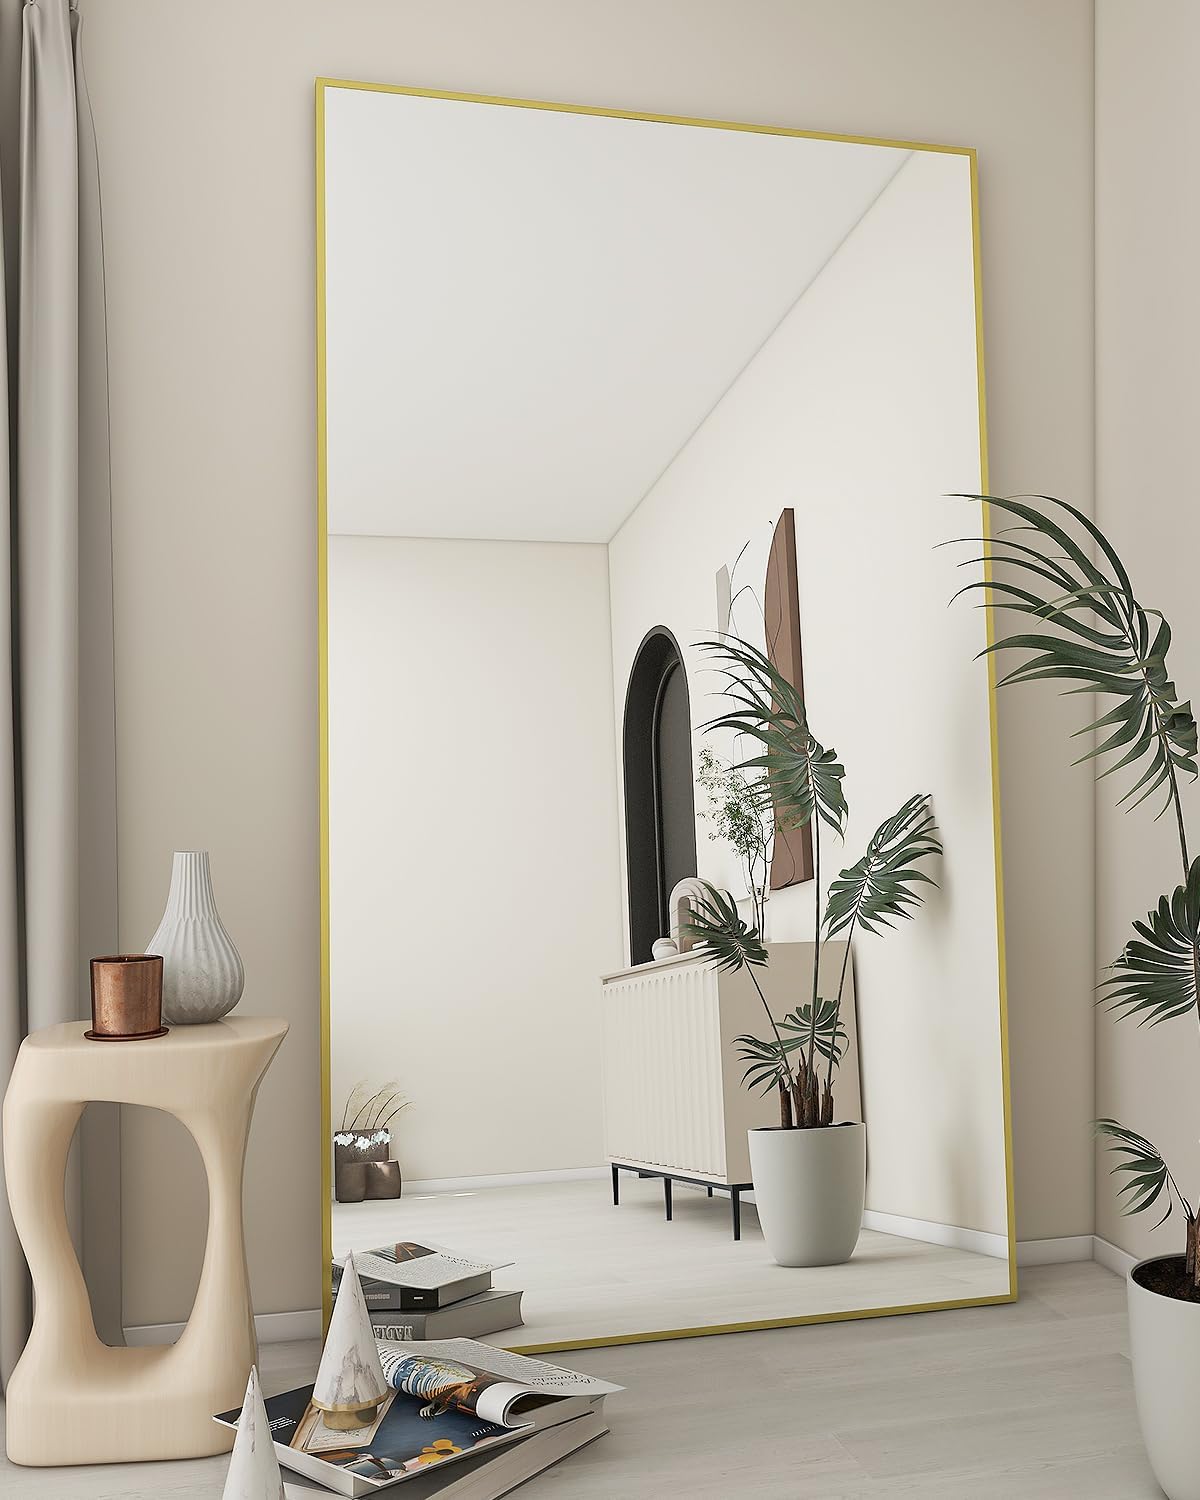 Don't Miss Your Chance to Save on the Koonmi 76"x34" Floor Mirror Full Length!